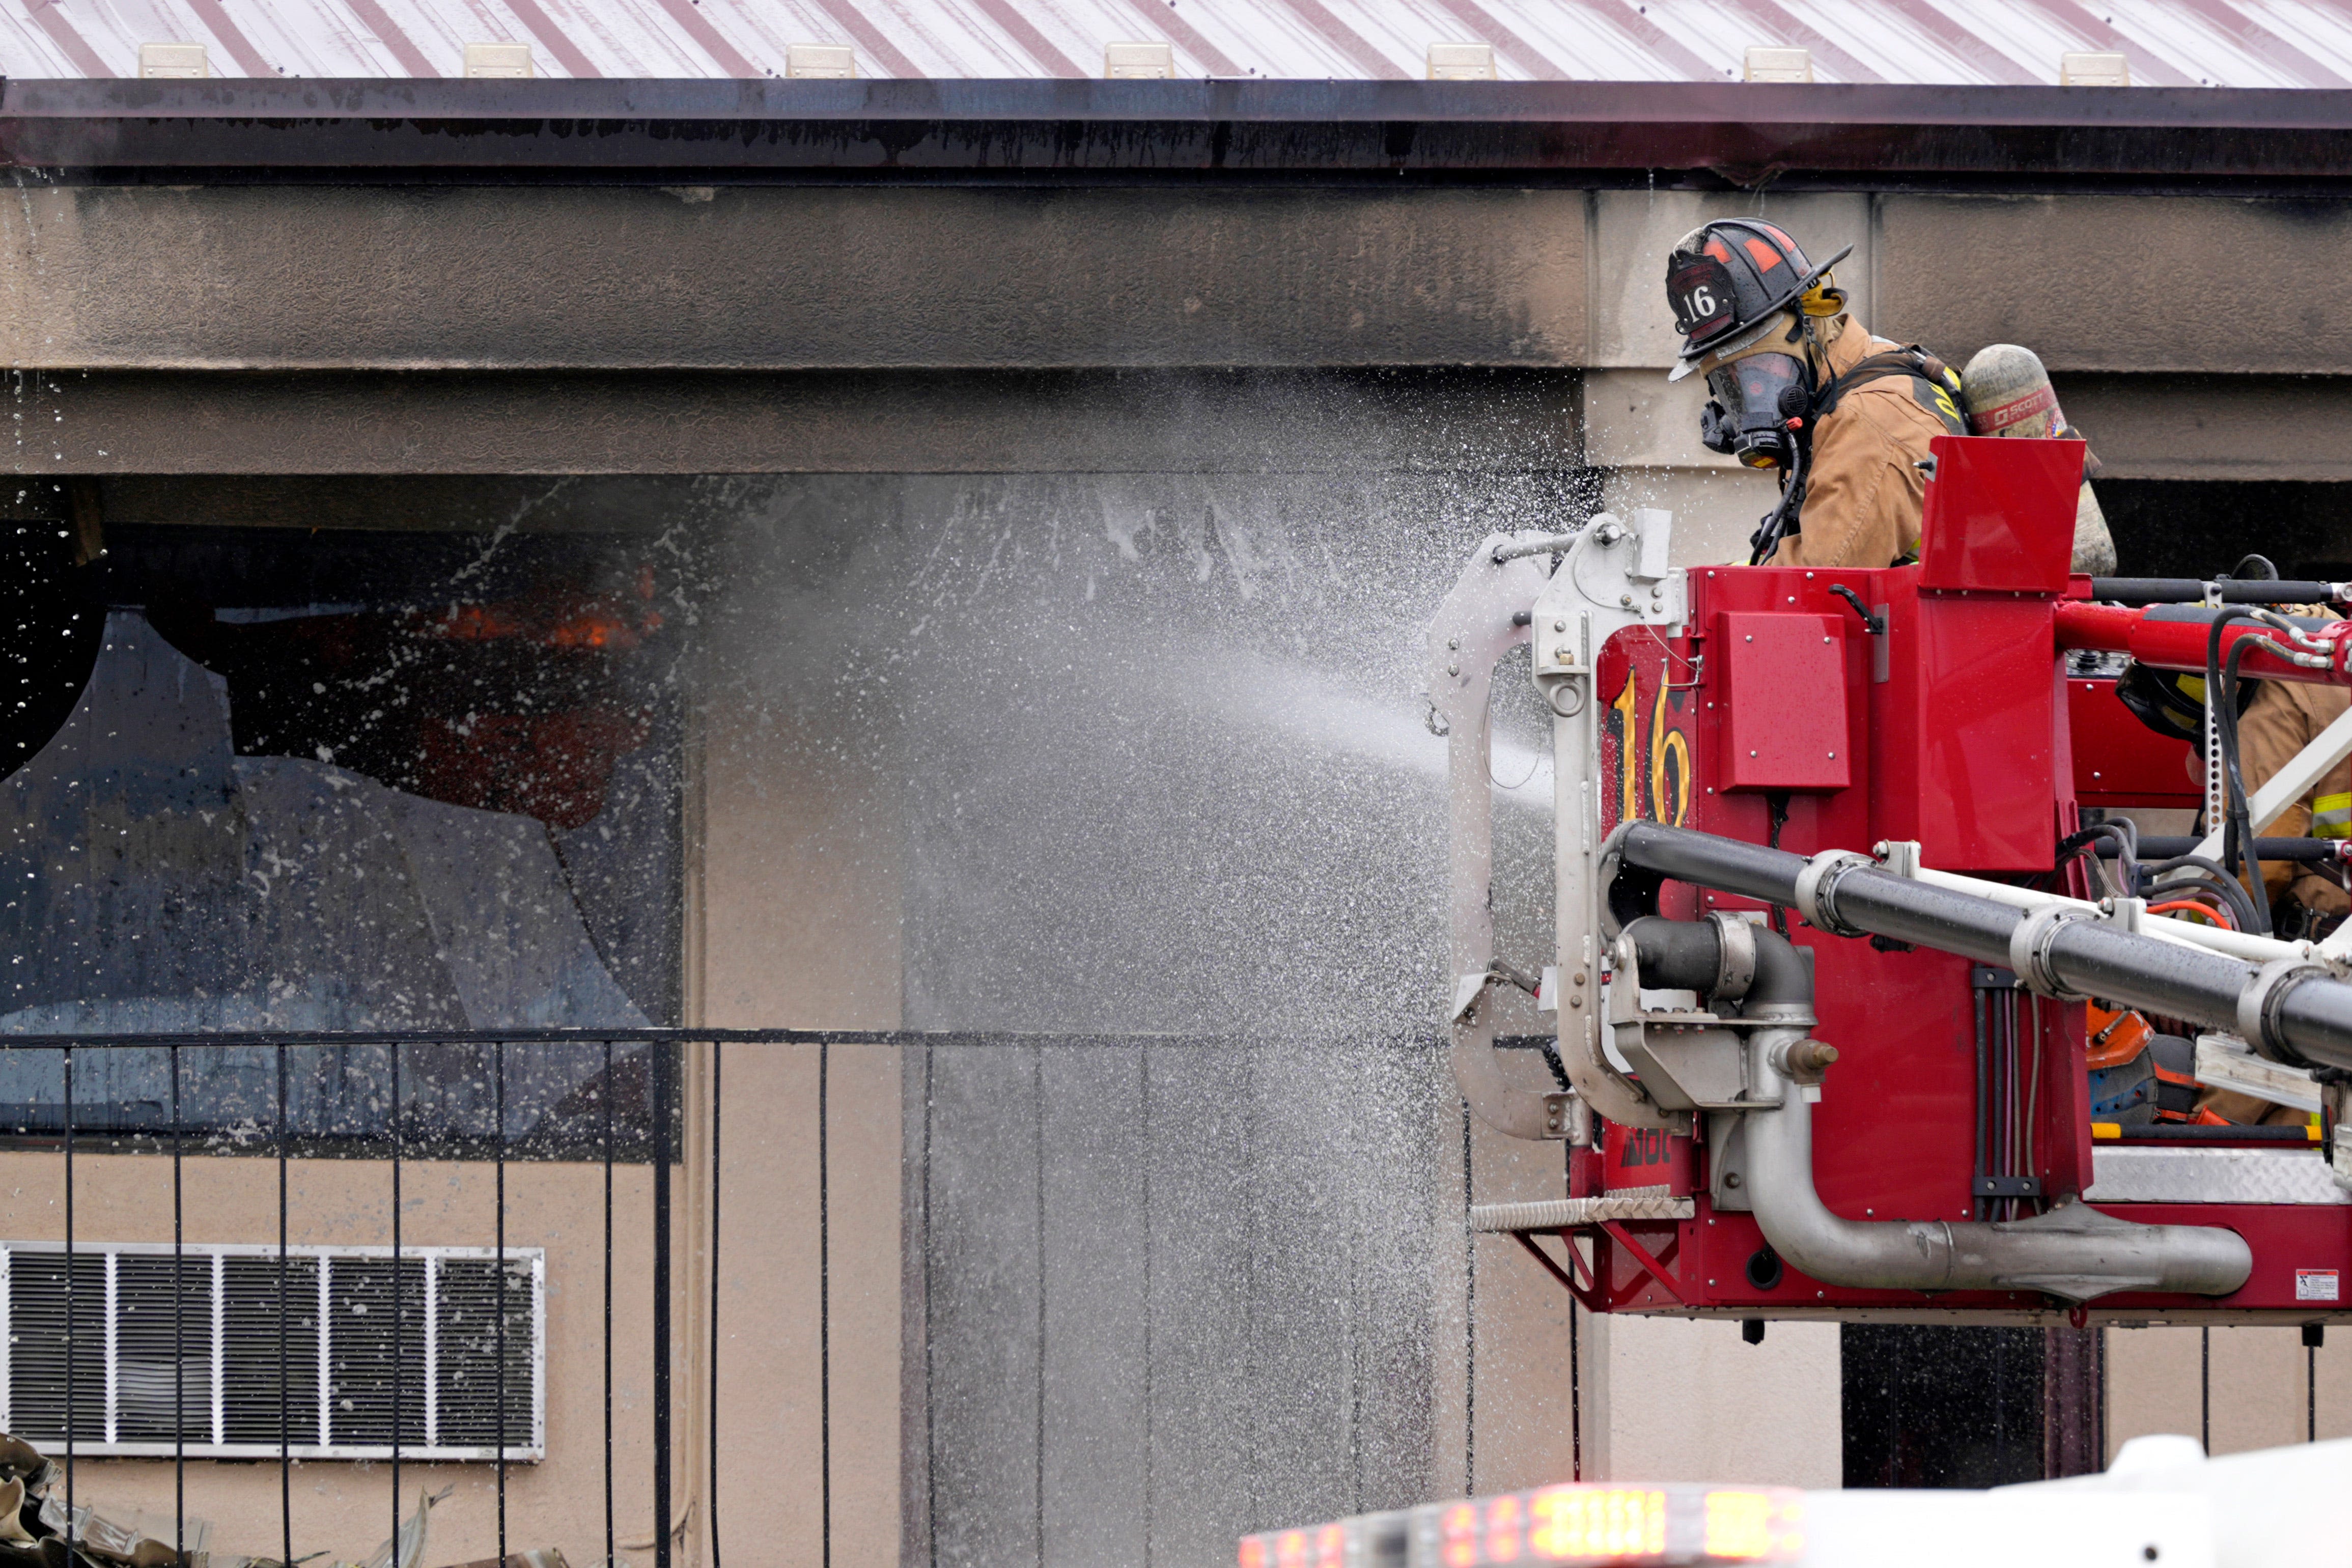 Oklahoma City firefighters respond to a fire at the Rodeway Inn. See our photos.